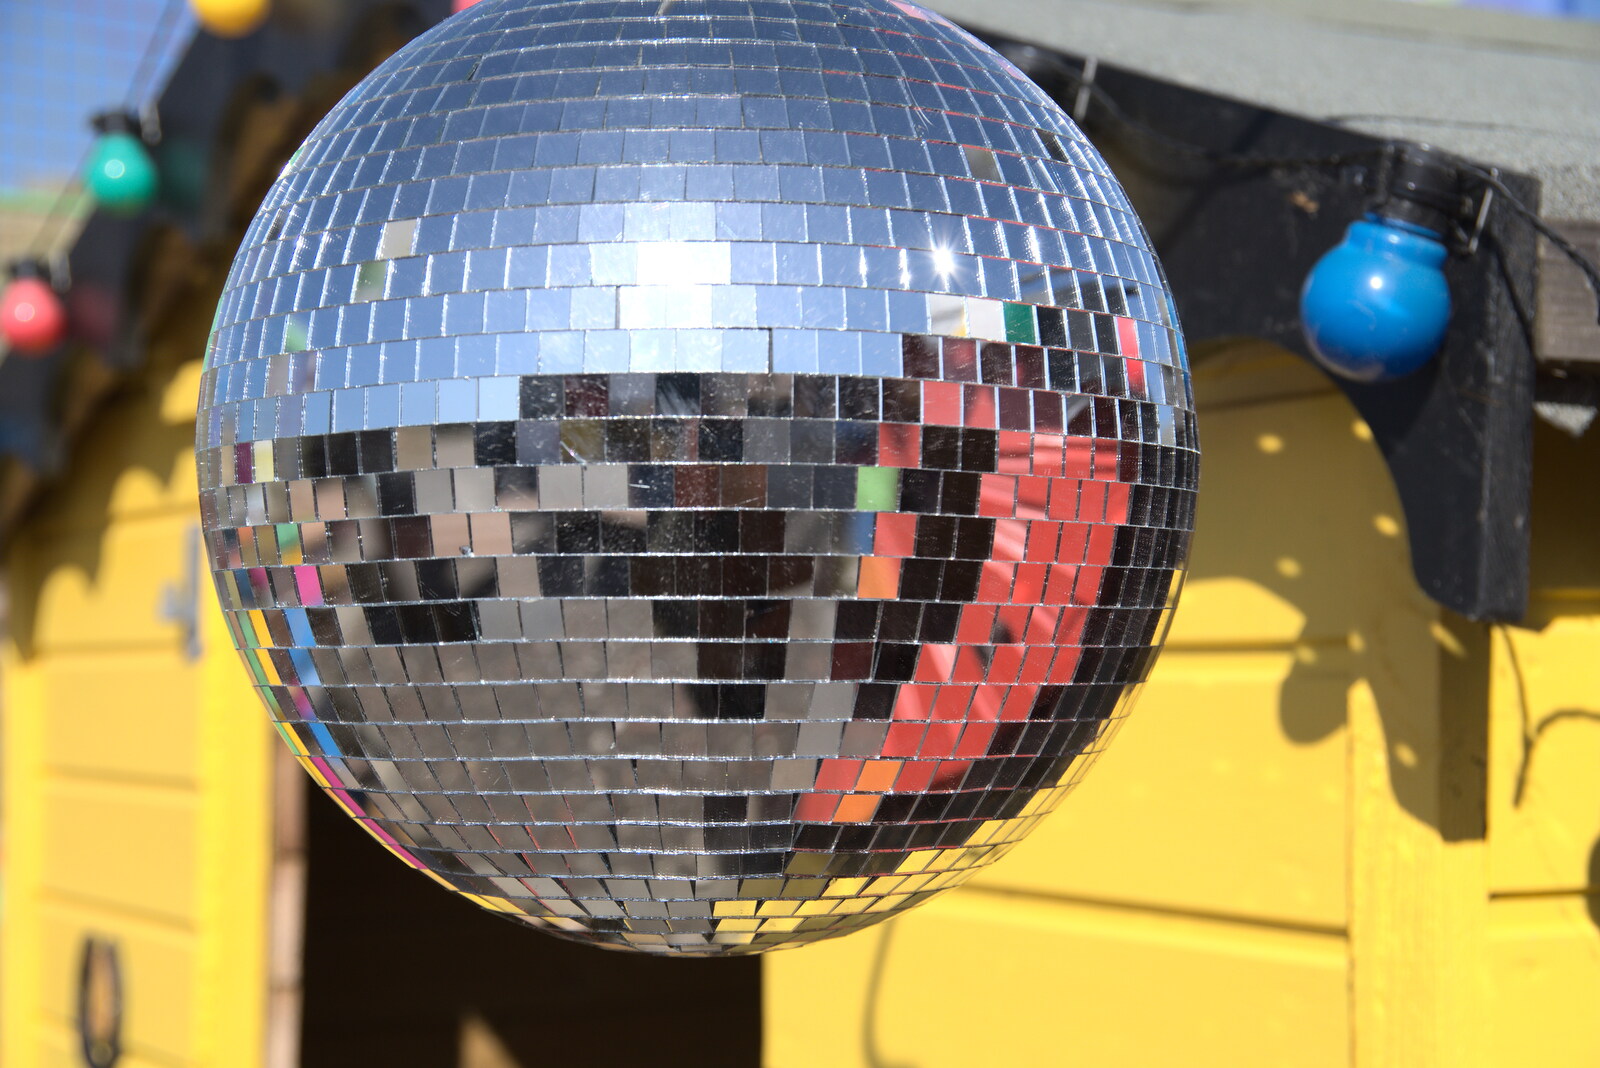 A café beach hut has a glitter ball hanging up from On the Beach at Sea Palling, Norfolk - 8th May 2022